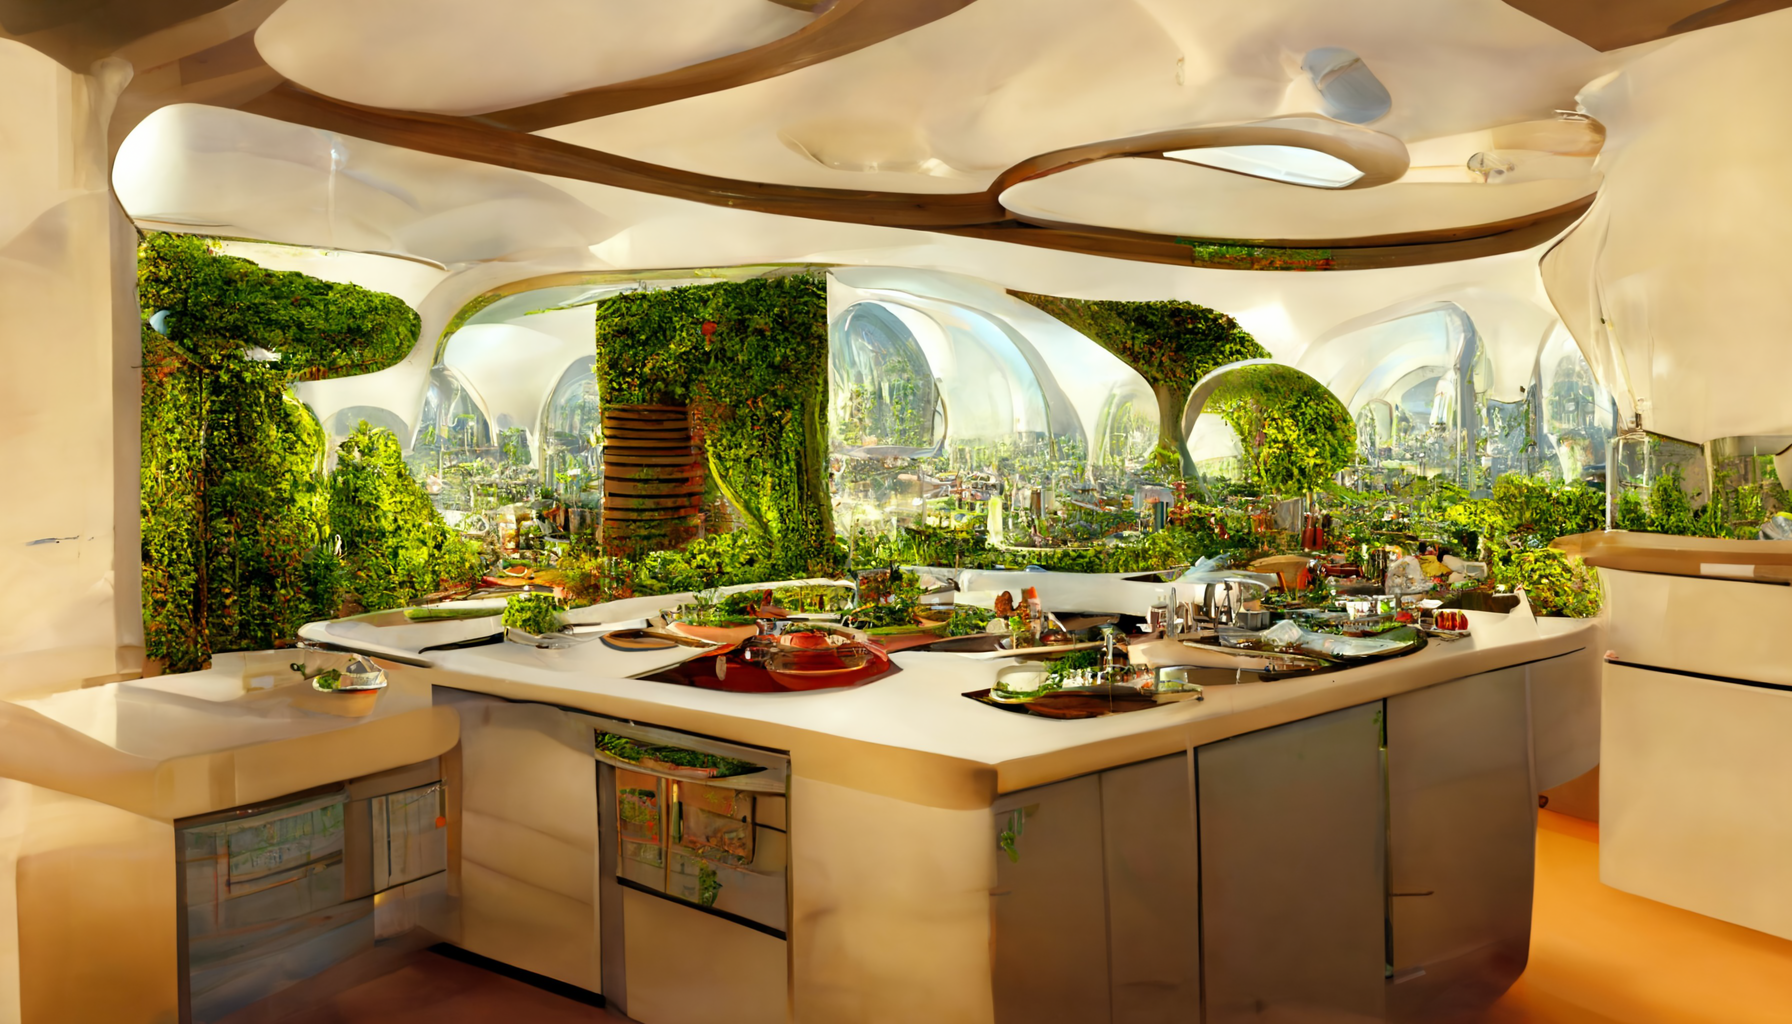 The Evolution of Smart Kitchens: Culinary Technology in 2050